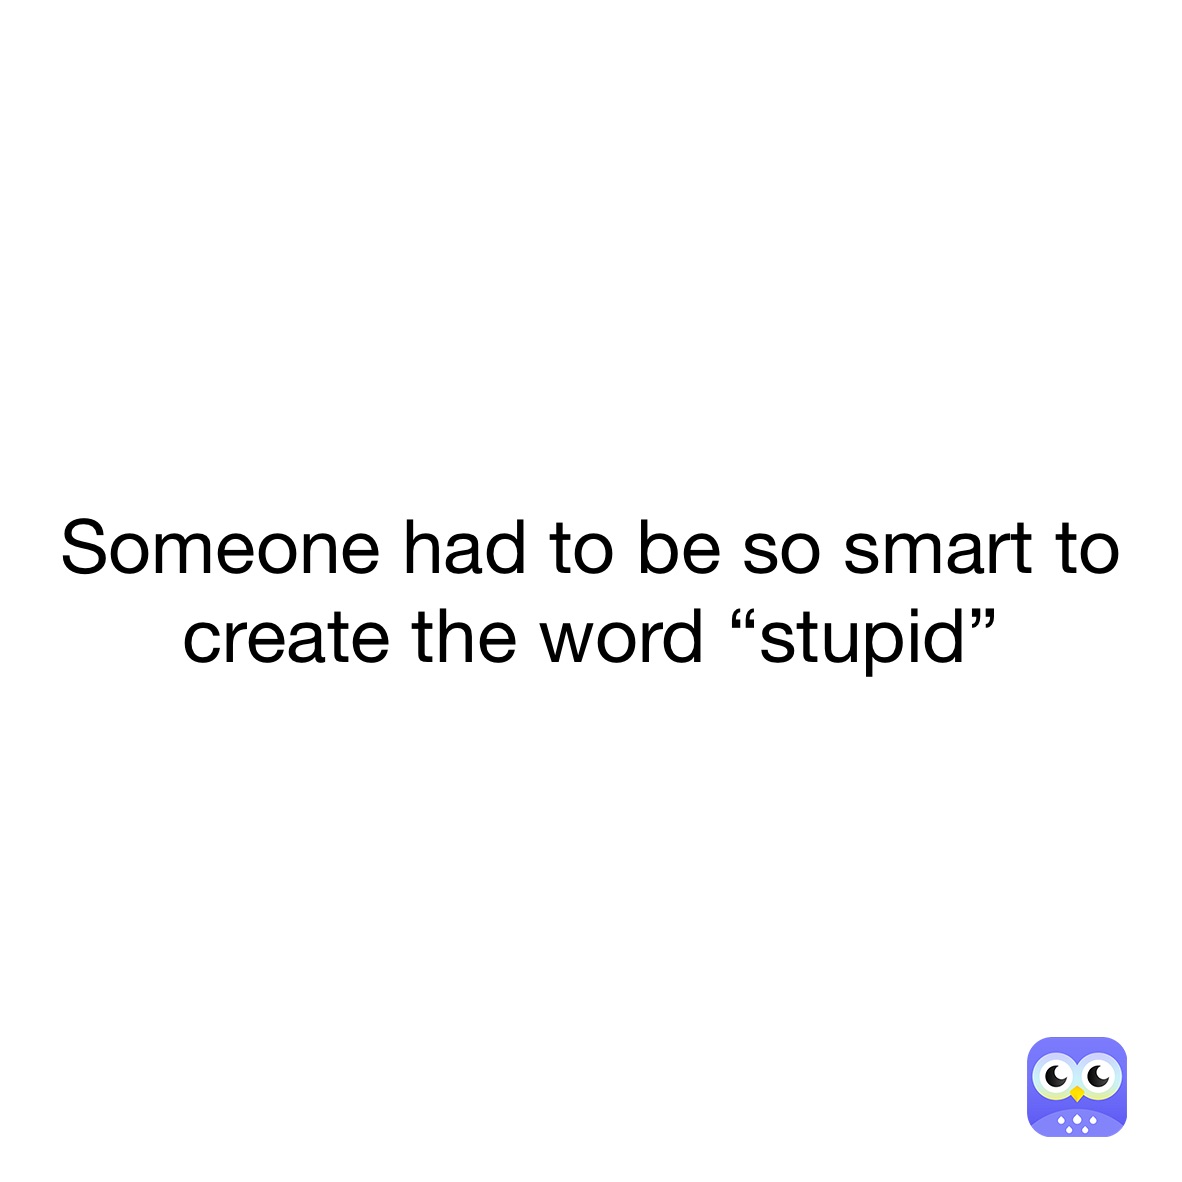 Someone had to be so smart to create the word “stupid”